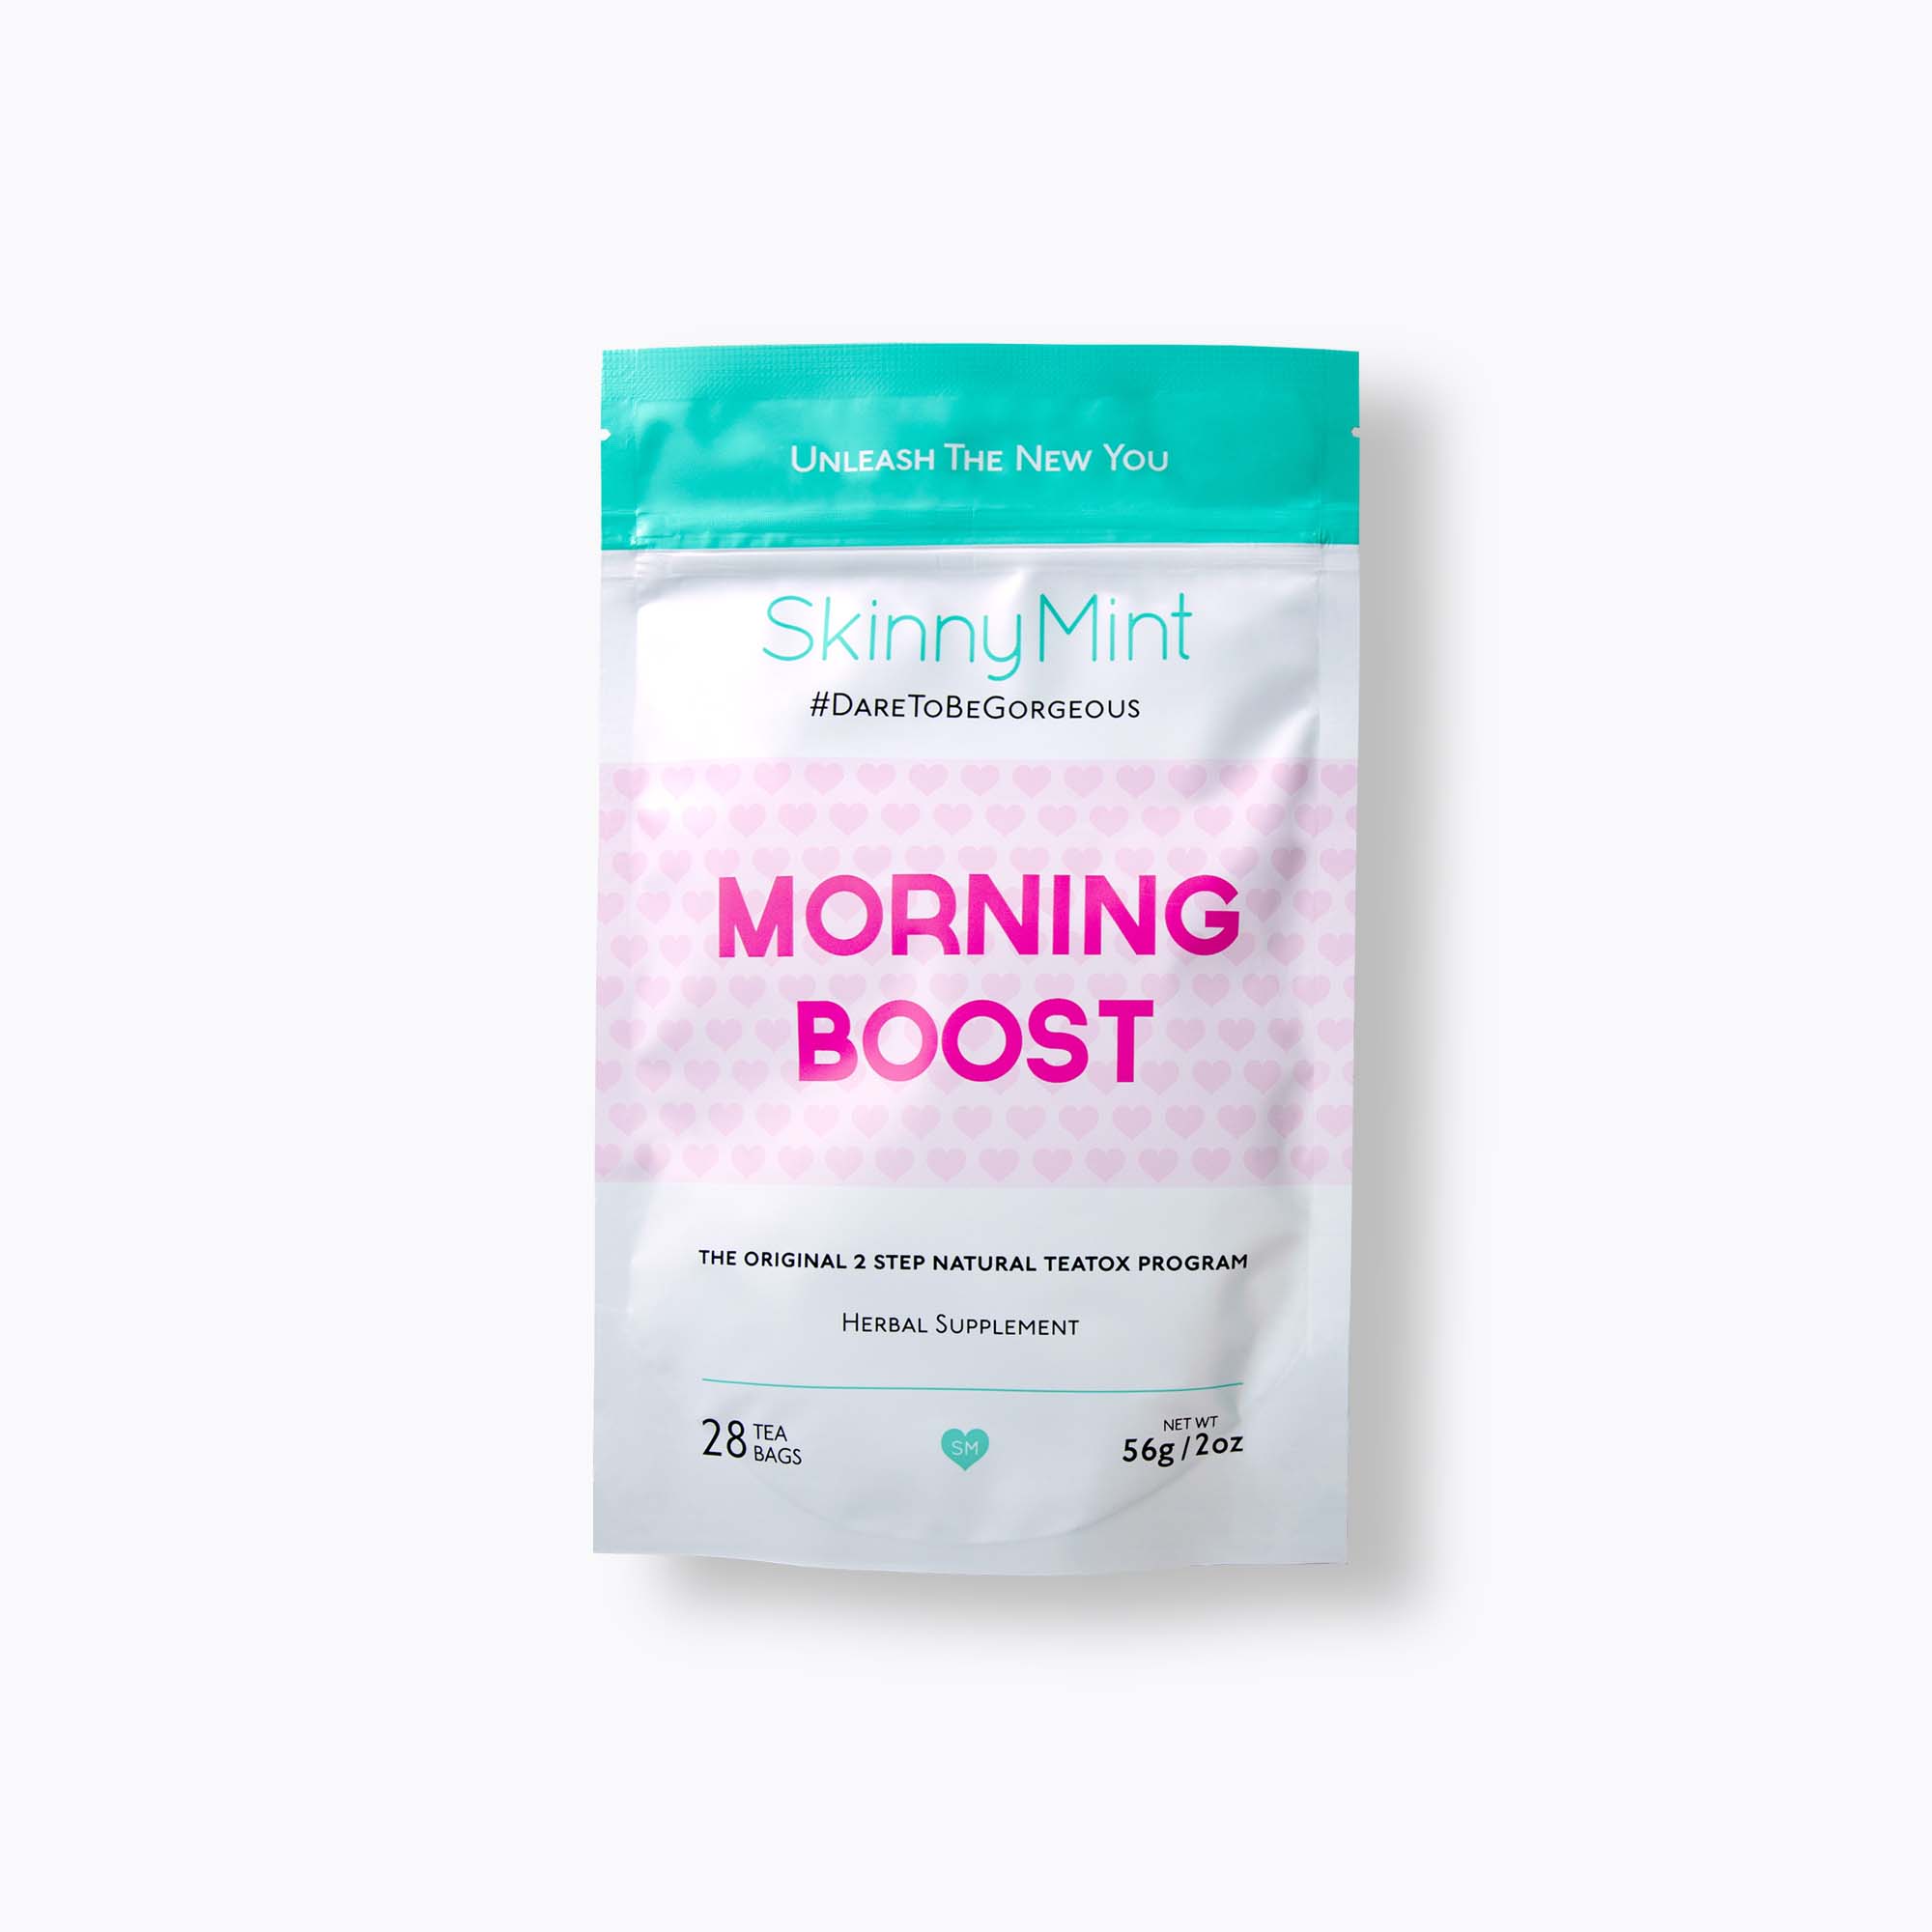 Free Morning Boost